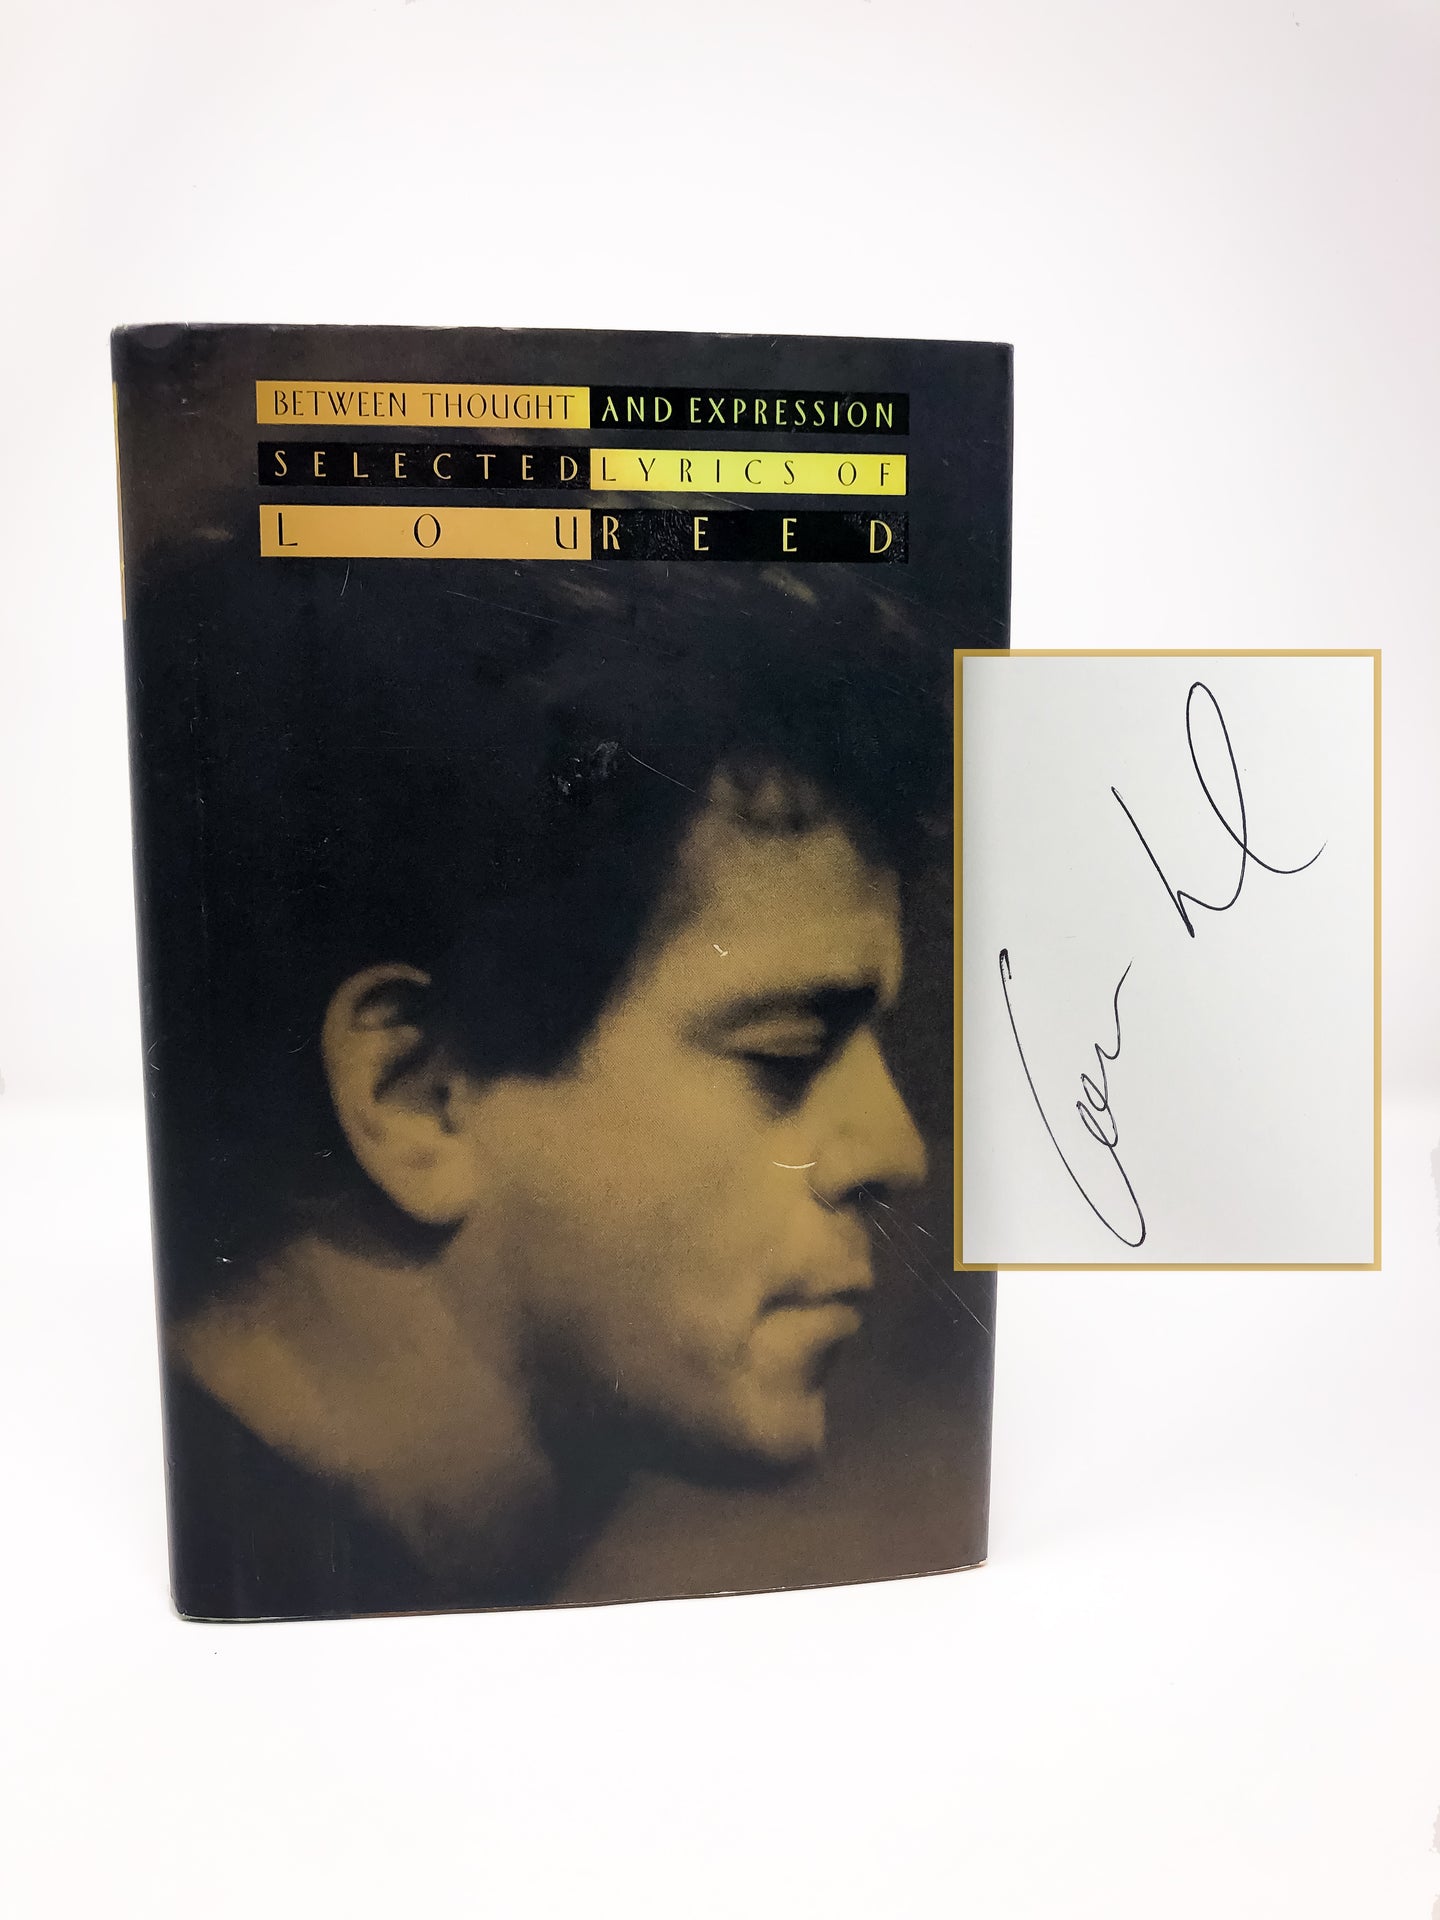 A signed first edition of Between Thought and Expression by Lou Reed